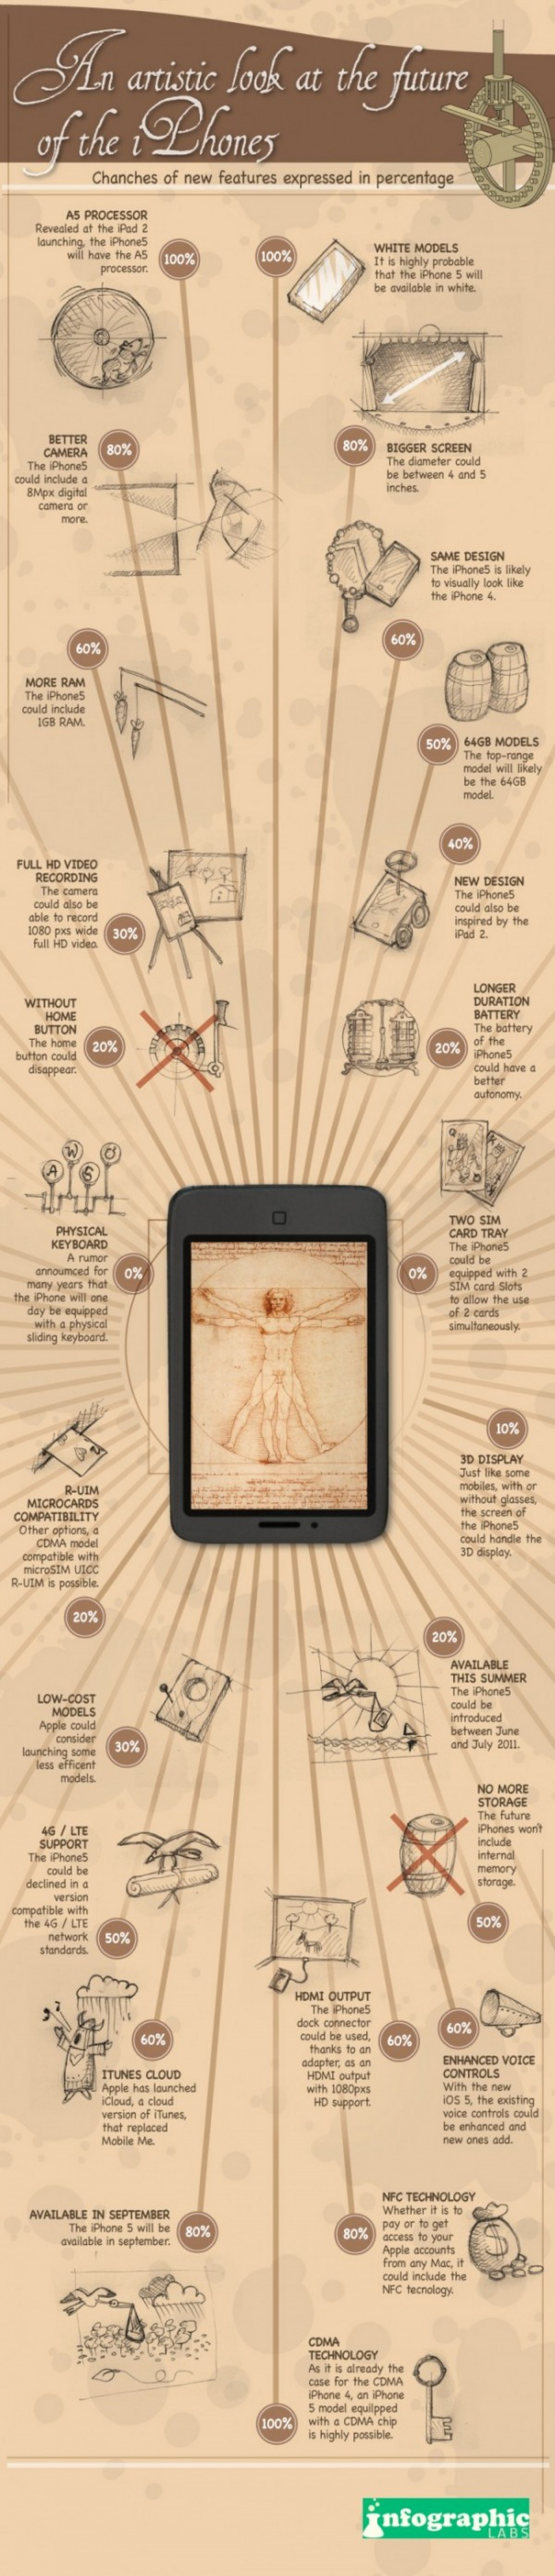 An Artistic Look at the Future of the IPhone Infographic